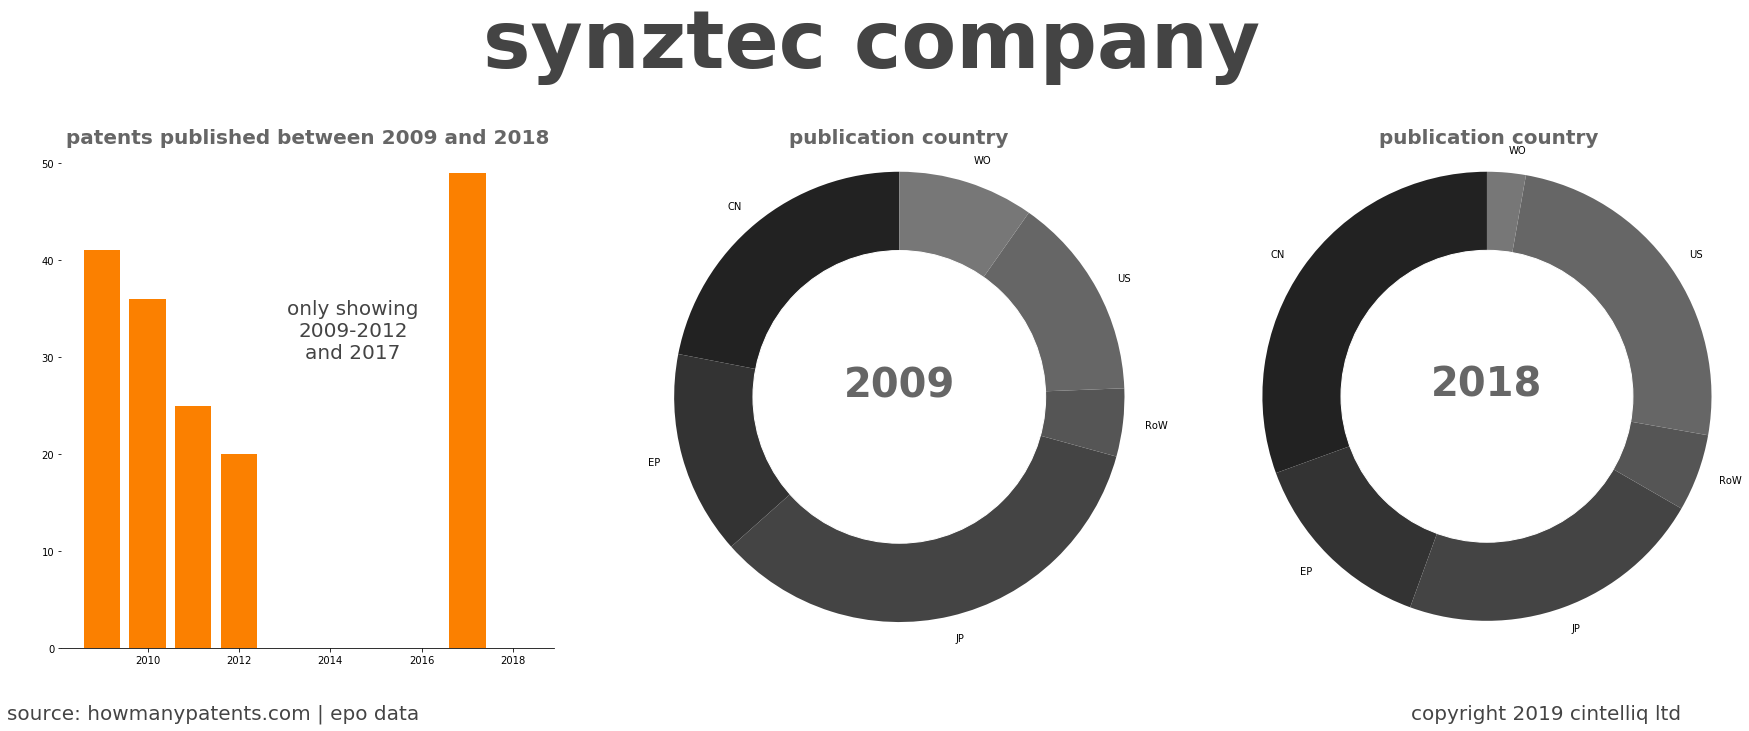 summary of patents for Synztec Company